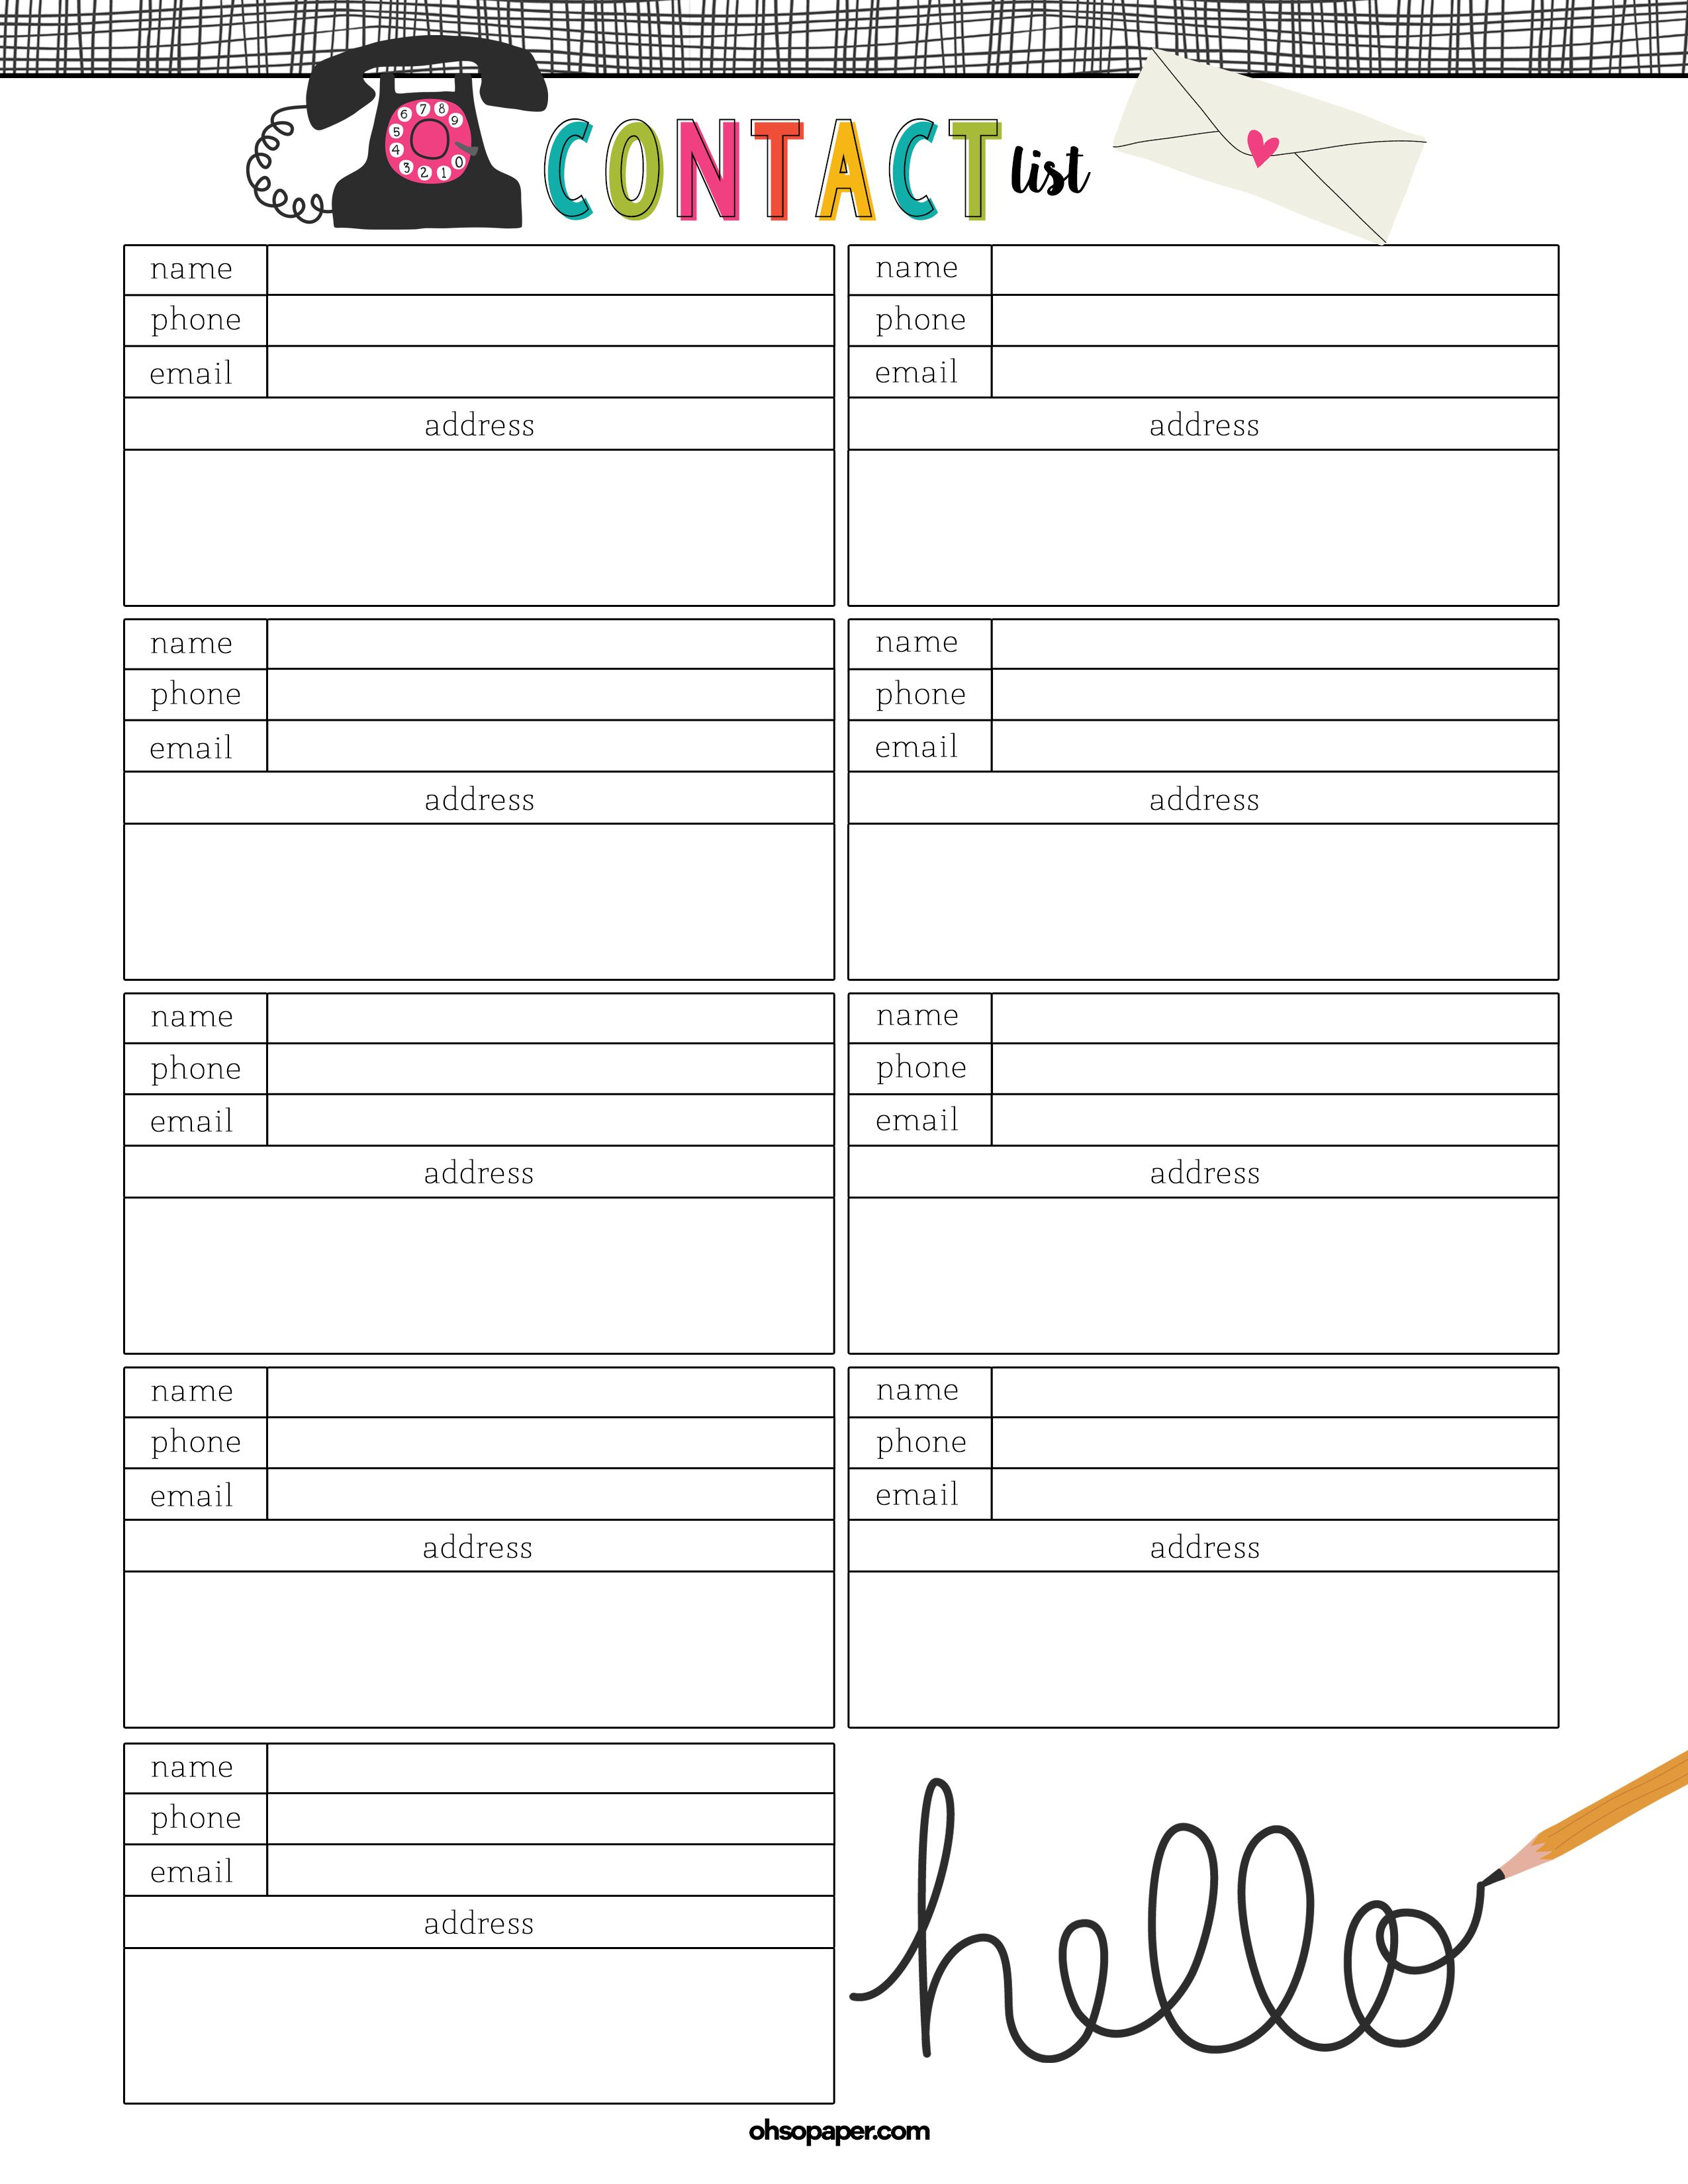 Free Printable Contact List Never Lose Contact Info Again With This - Free Printable Contact List